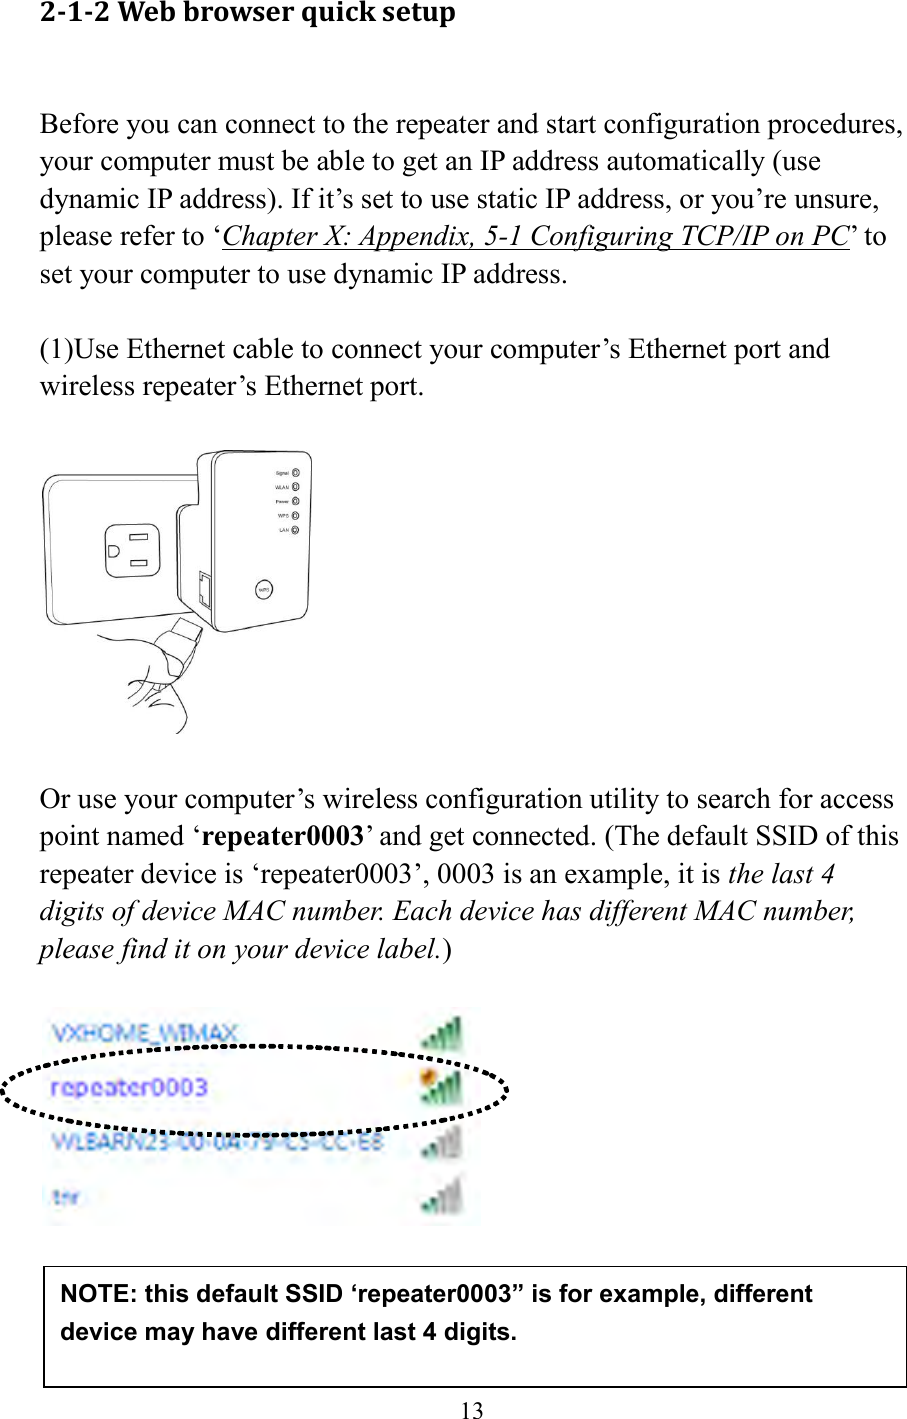  13  2-1-2 Web browser quick setup  Before you can connect to the repeater and start configuration procedures, your computer must be able to get an IP address automatically (use dynamic IP address). If it’s set to use static IP address, or you’re unsure, please refer to ‘Chapter X: Appendix, 5-1 Configuring TCP/IP on PC’ to set your computer to use dynamic IP address.  (1)Use Ethernet cable to connect your computer’s Ethernet port and wireless repeater’s Ethernet port.    Or use your computer’s wireless configuration utility to search for access point named ‘repeater0003’ and get connected. (The default SSID of this repeater device is ‘repeater0003’, 0003 is an example, it is the last 4 digits of device MAC number. Each device has different MAC number, please find it on your device label.)       NOTE: this default SSID ‘repeater0003” is for example, different device may have different last 4 digits. 